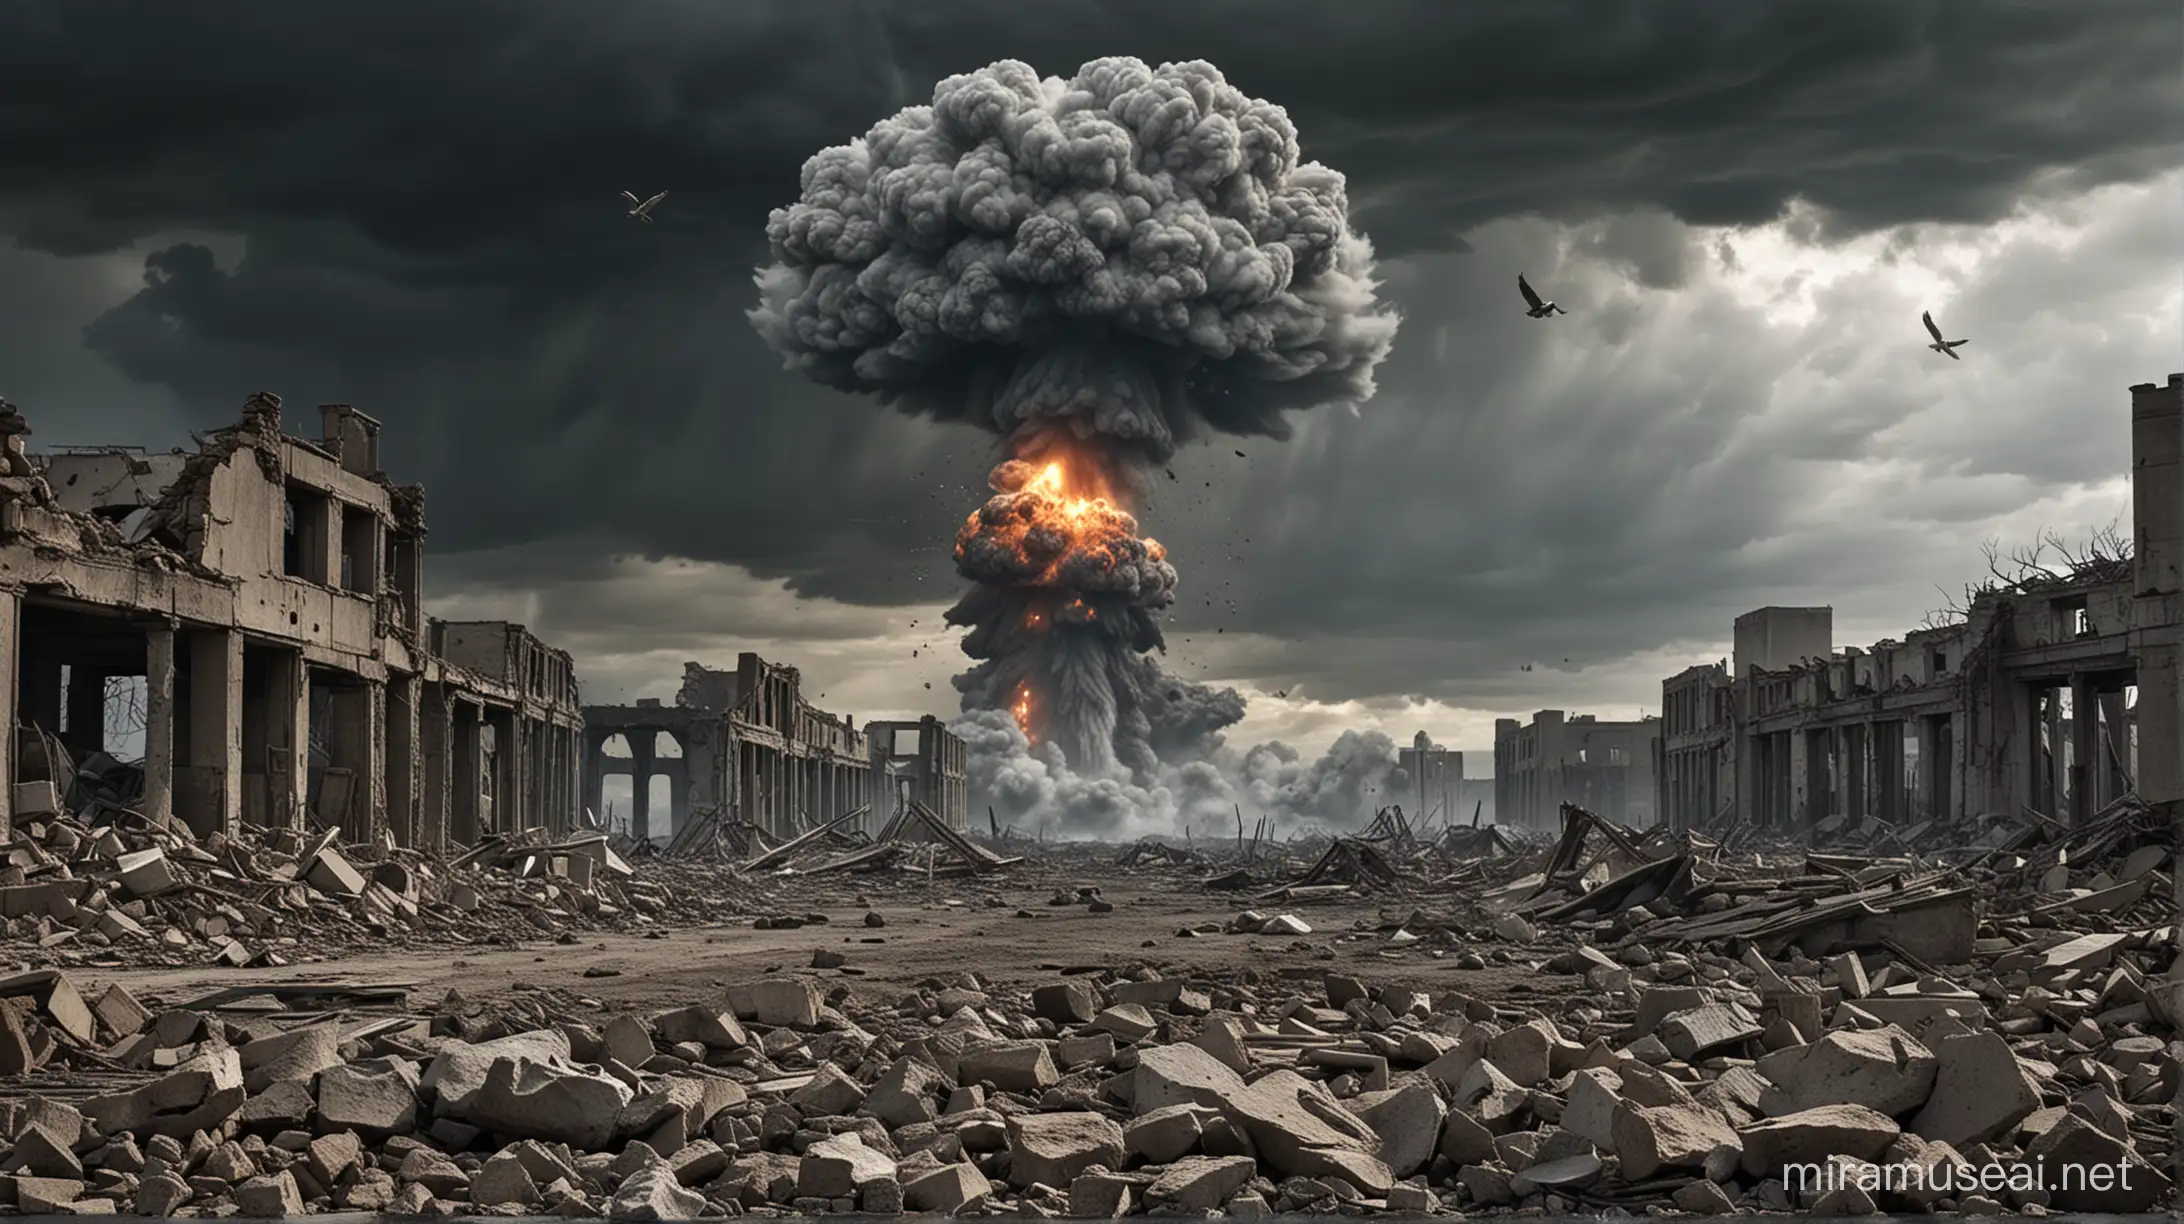 Create an image depicting the aftermath of a nuclear war, inspired by the script. Include elements such as a mushroom cloud representing a detonated atomic bomb, a devastated landscape with ruins and destruction, and people fleeing or seeking shelter. Use a mix of dark and ominous tones to convey the seriousness of the topic. Additionally, include symbols of hope and resilience, such as a dove or a sprout breaking through the rubble, to emphasize the importance of seeking peace and rebuilding after such a catastrophic event.